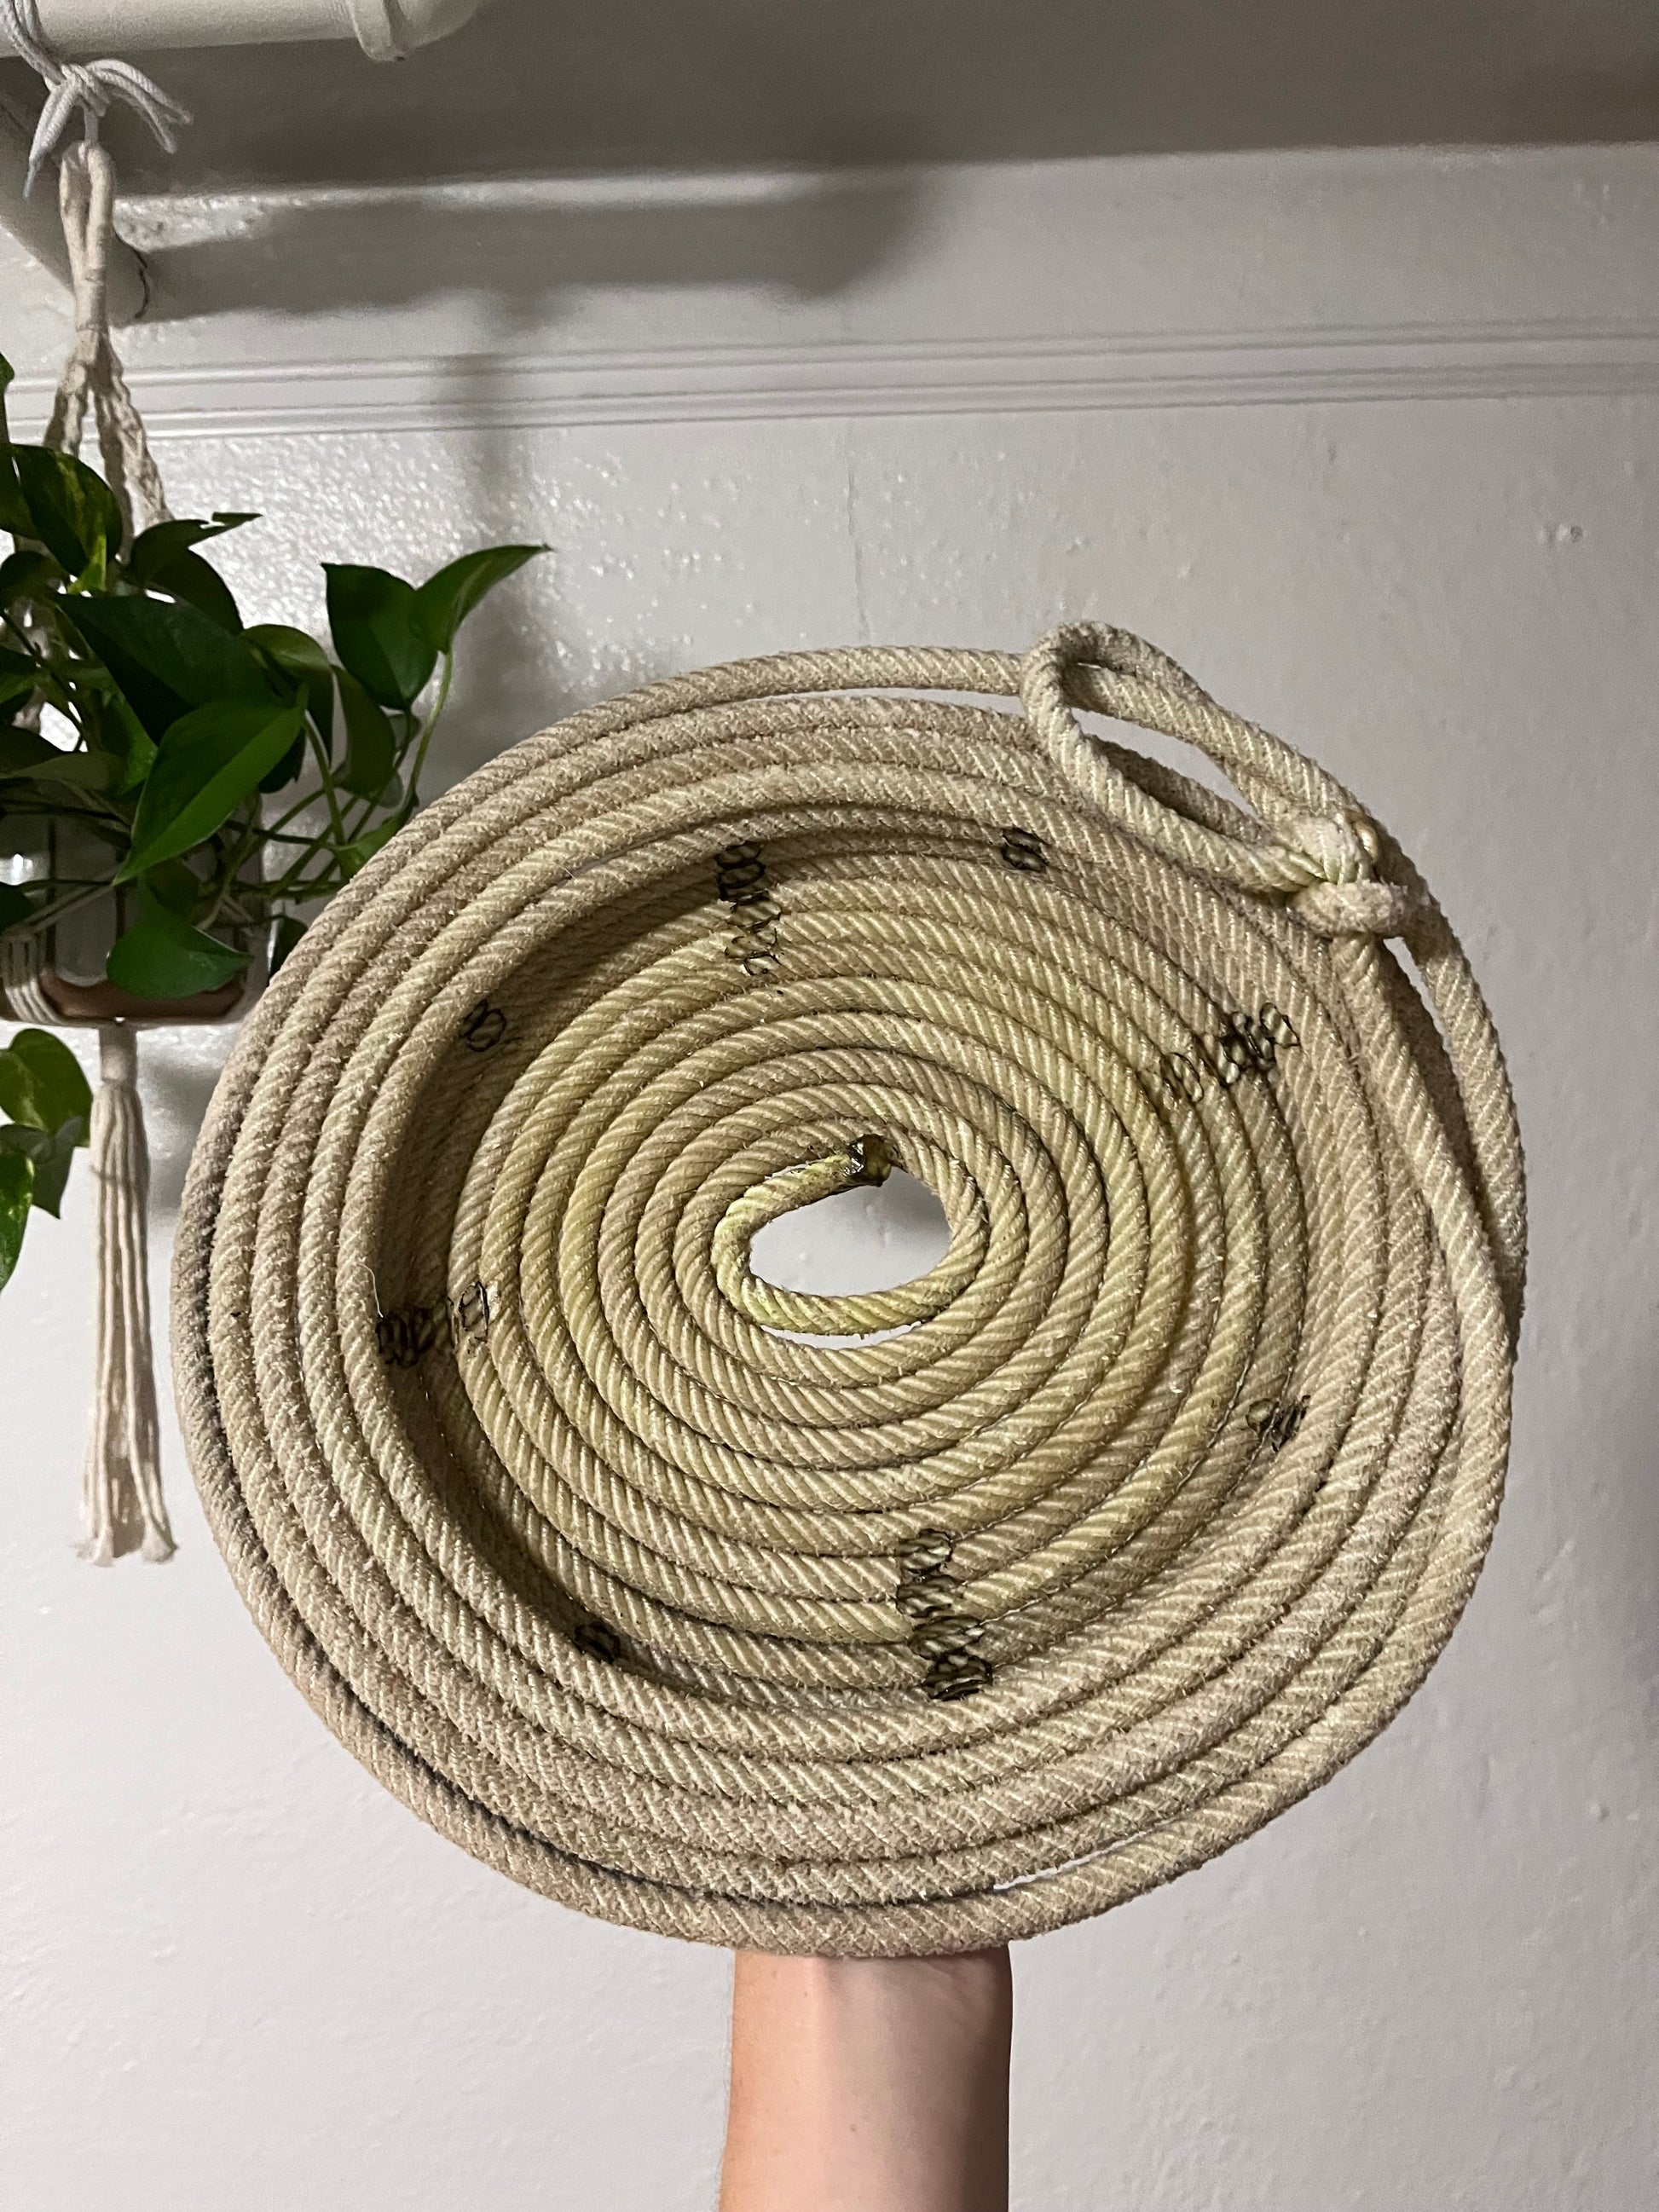  Decorative Green Flat Rope Basket Artist: Aleah Russell  up-cycled lariat rope  Rope came from an genuine Wyoming ranch  Wide shallow rope basket  Will add a touch of western decore to any home  Makes a good basket for assorted items  Add a bowl inside for holding small items  12.75" long x 3.5" high x 12" wide